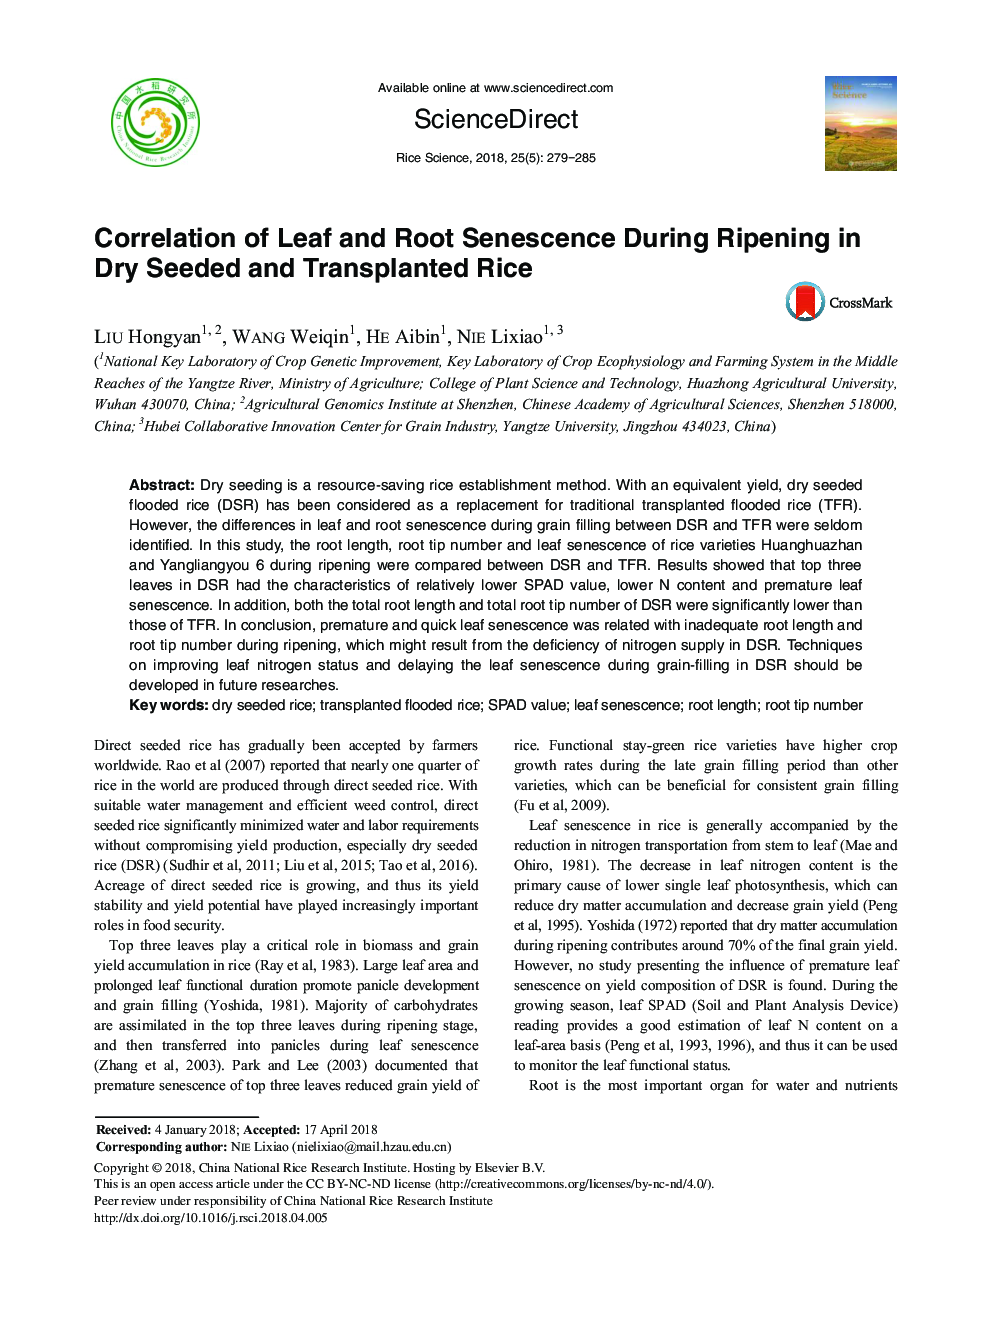 Correlation of Leaf and Root Senescence During Ripening in Dry Seeded and Transplanted Rice